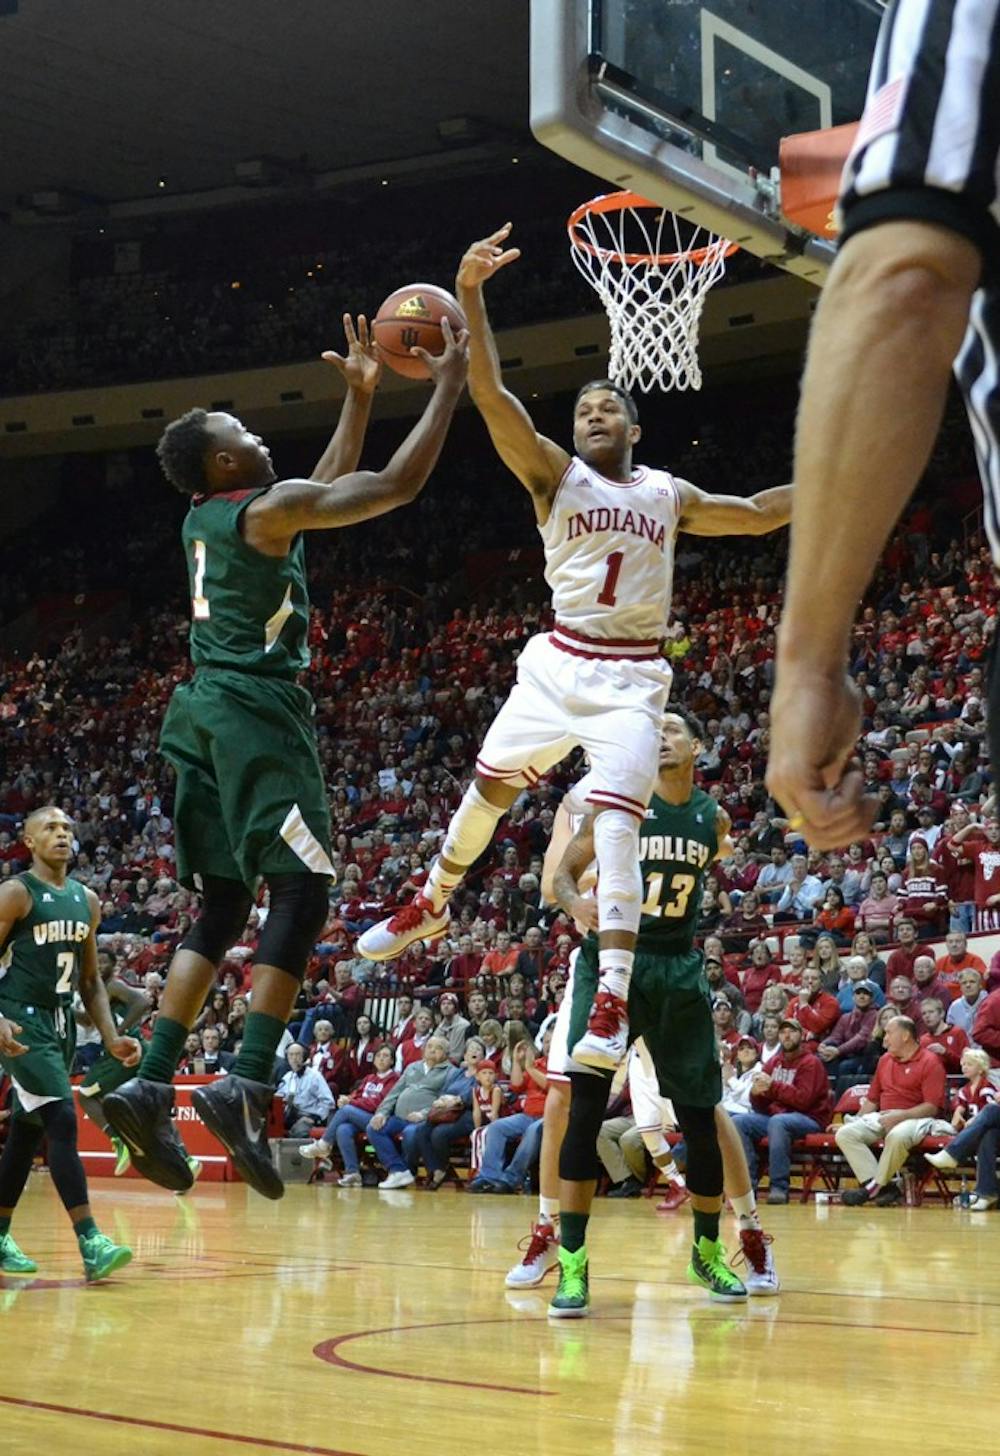 Freshman guard James Blackmon Jr. misses a shot during the game against Mississippi Valley State on Friday at Assembly Hall.